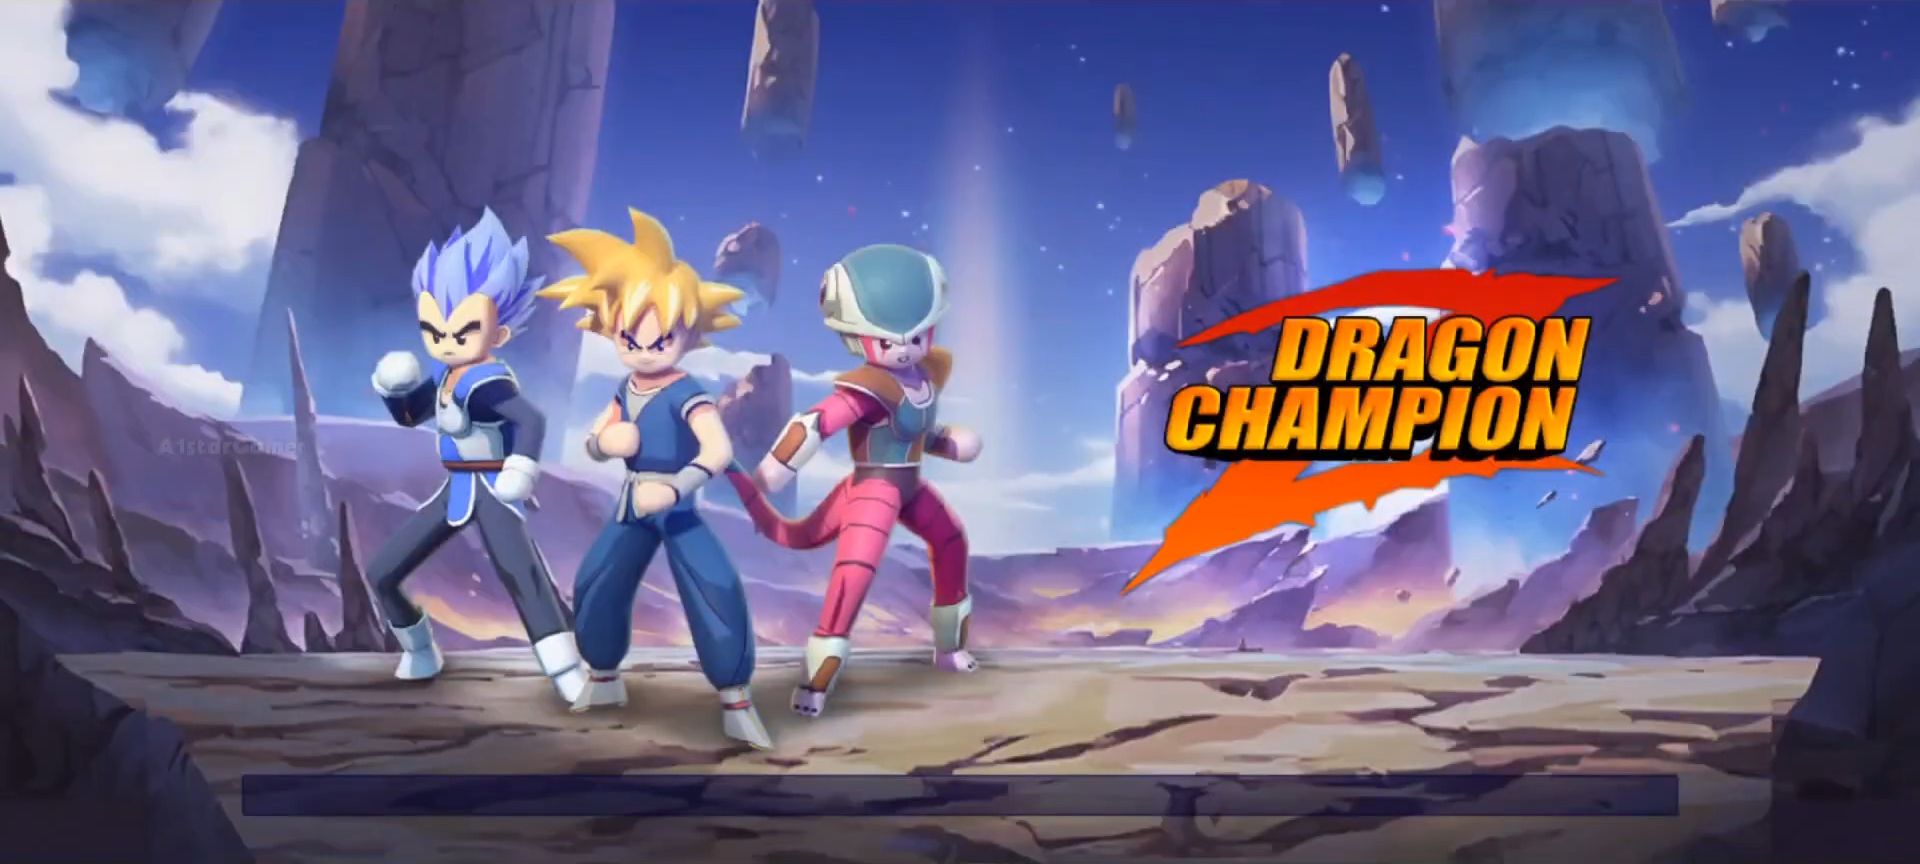 Download Dragon Champion Z Android free game.